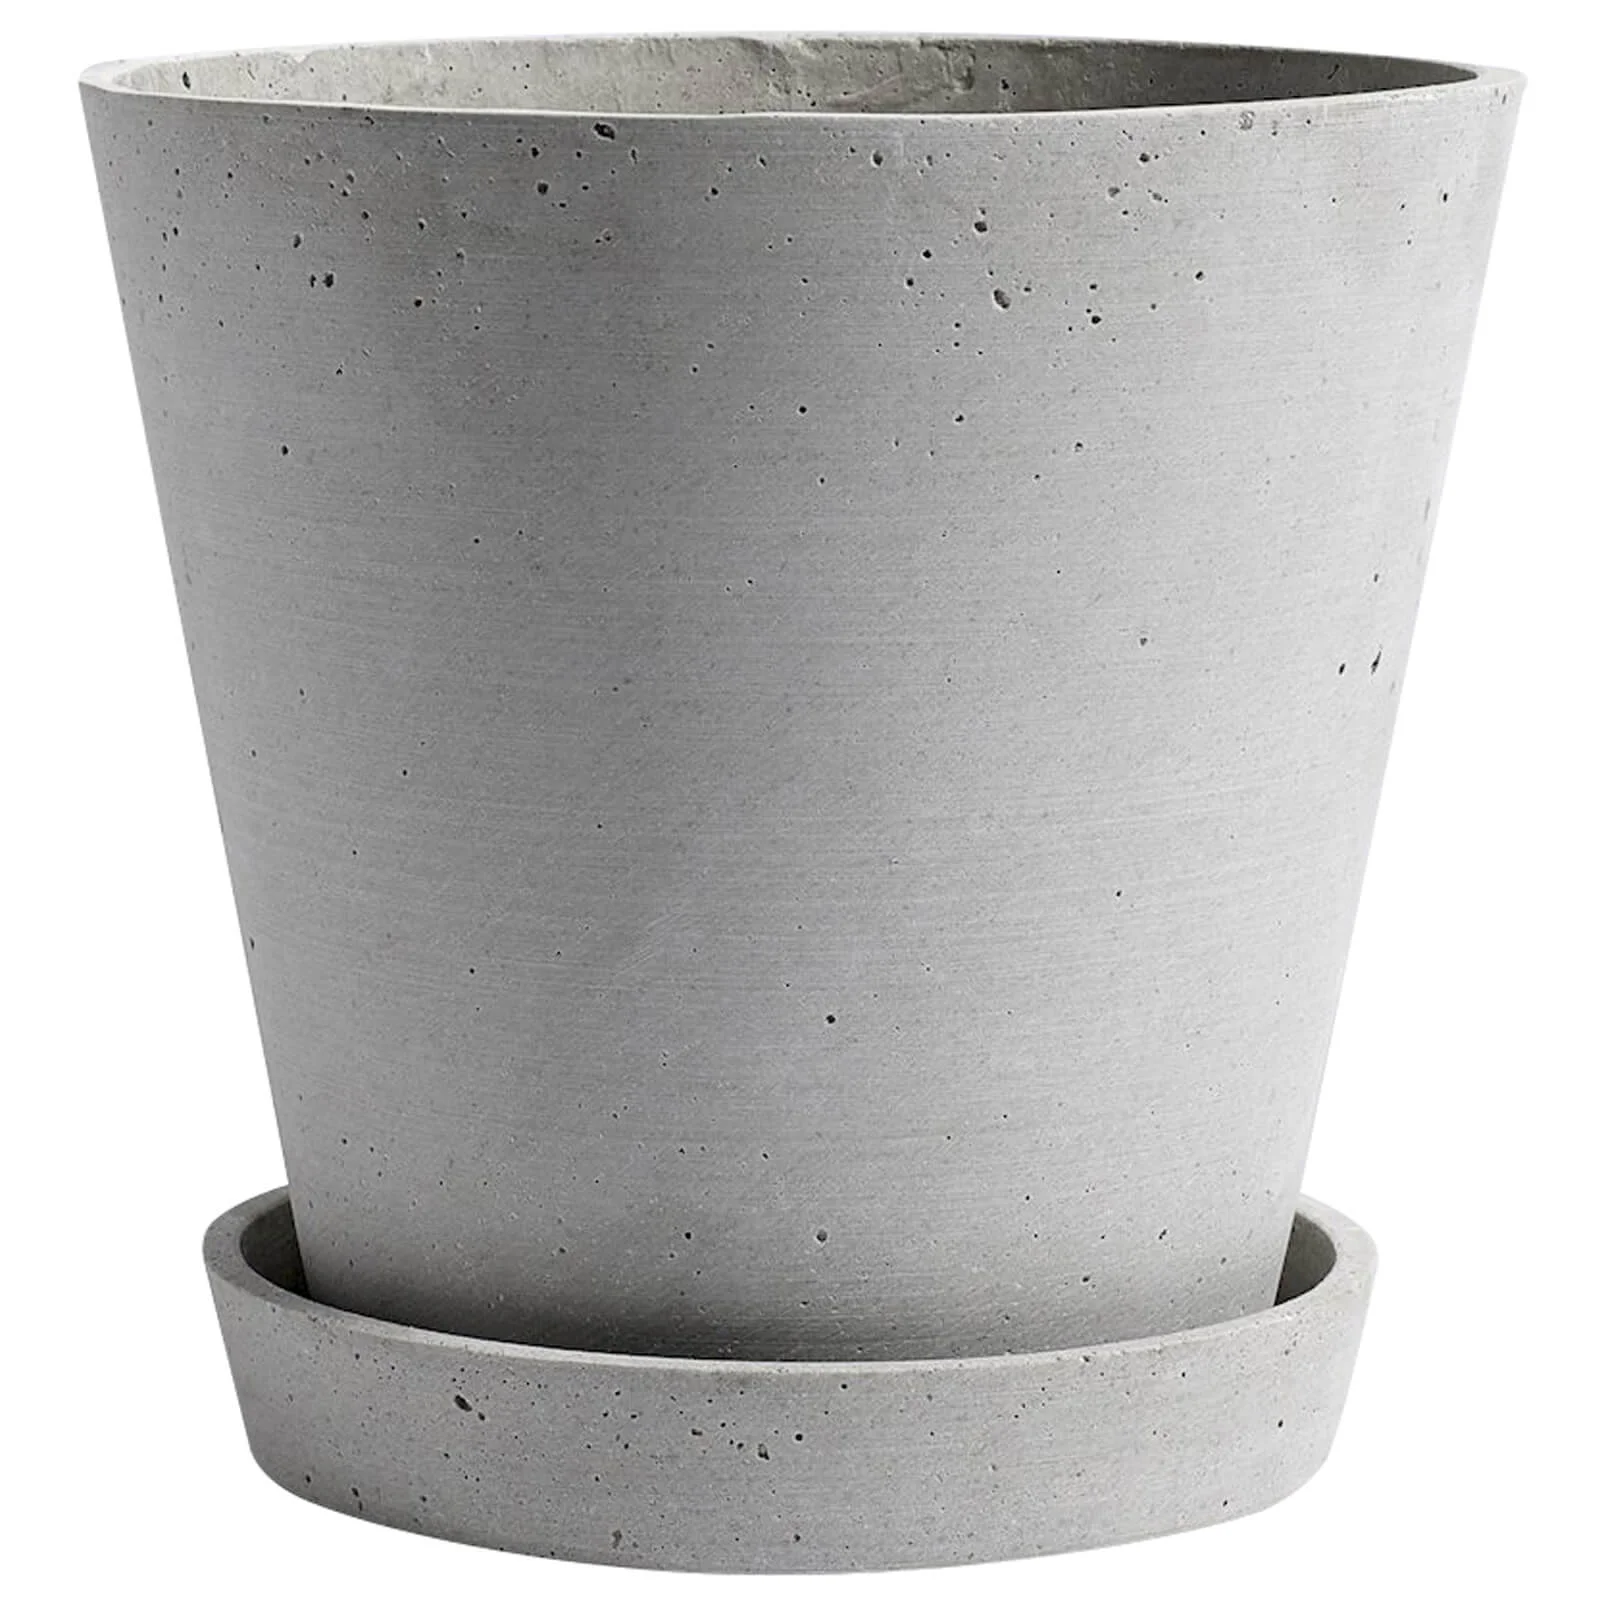 HAY Flowerpot with Saucer - Extra Large - Grey Image 1